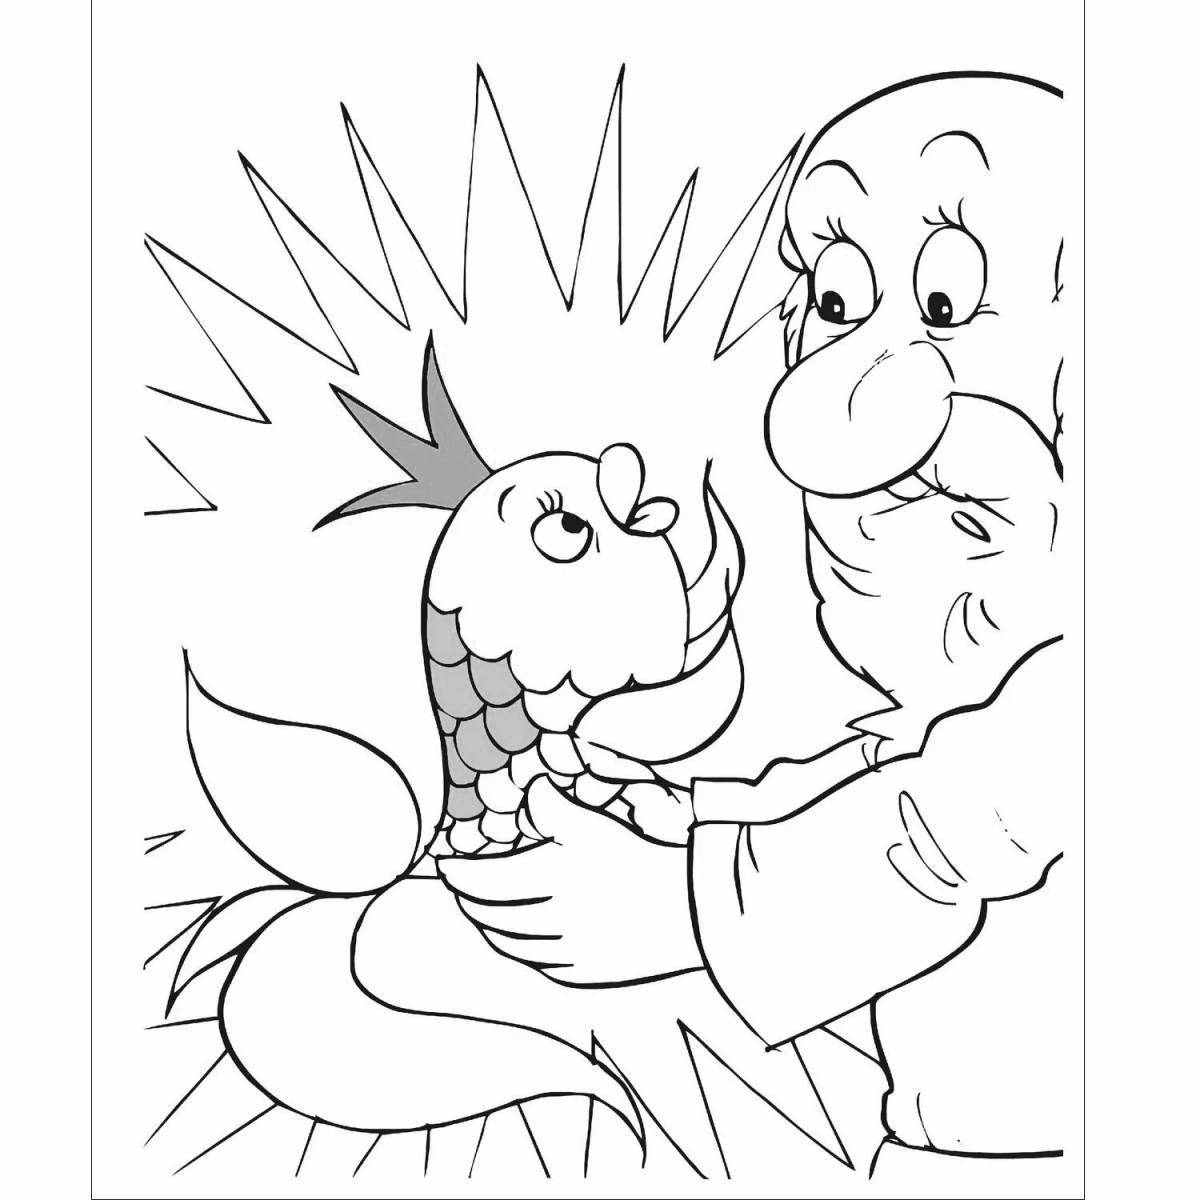 Coloring book Pushkin's whimsical tale